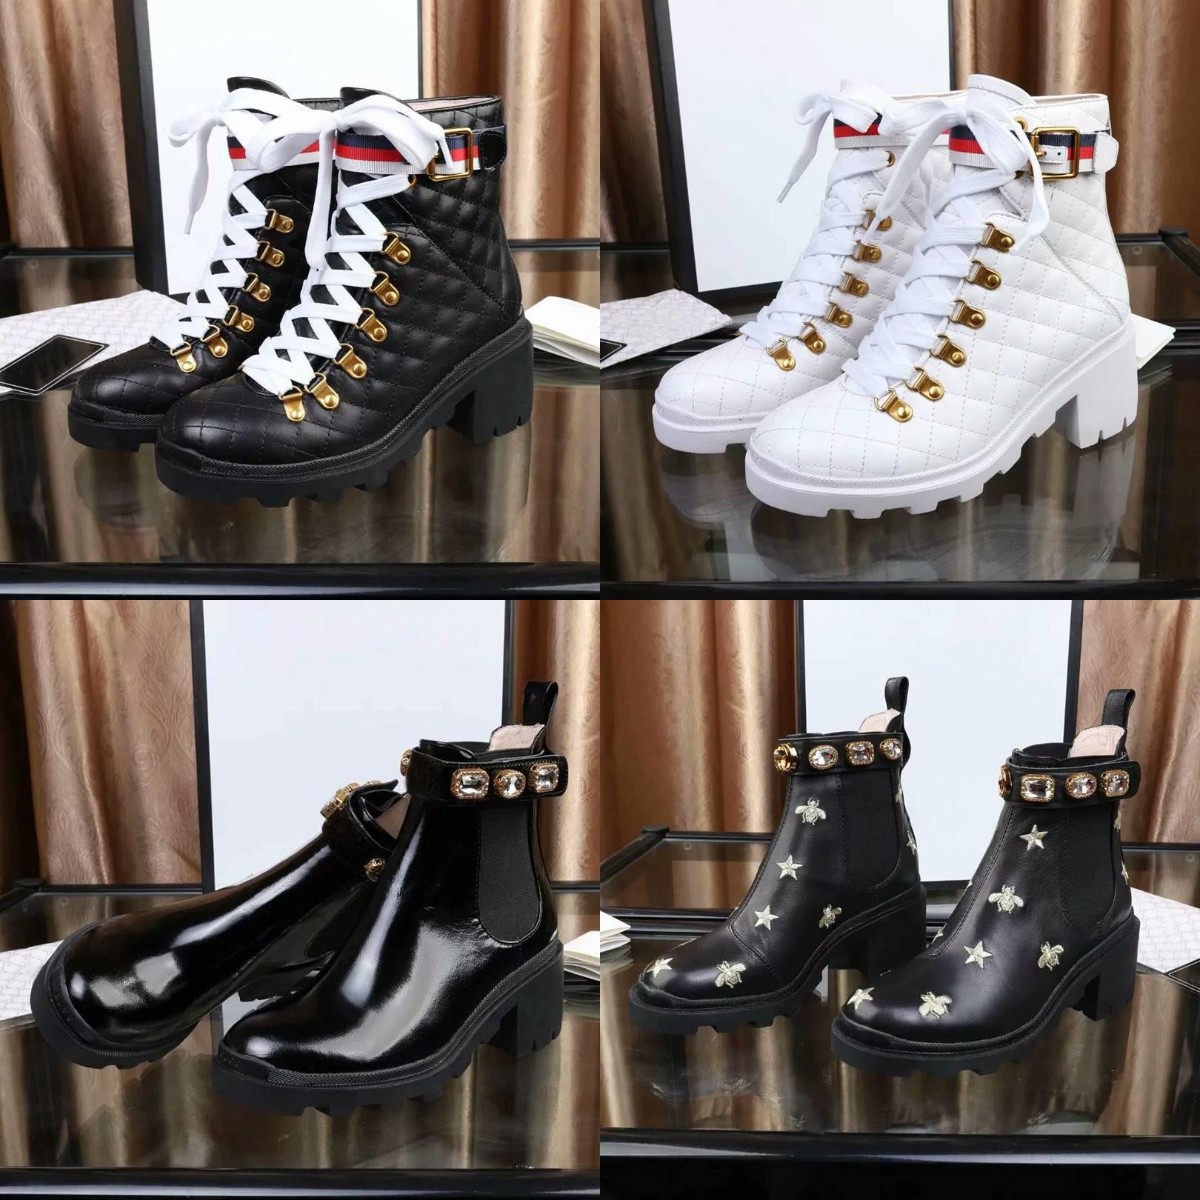 

Designer Women Boots Classic Leather Booties Belt Buckle Ankle Shoes Desert Martin Boot Female Rough Heel Round Head Shoe With Box